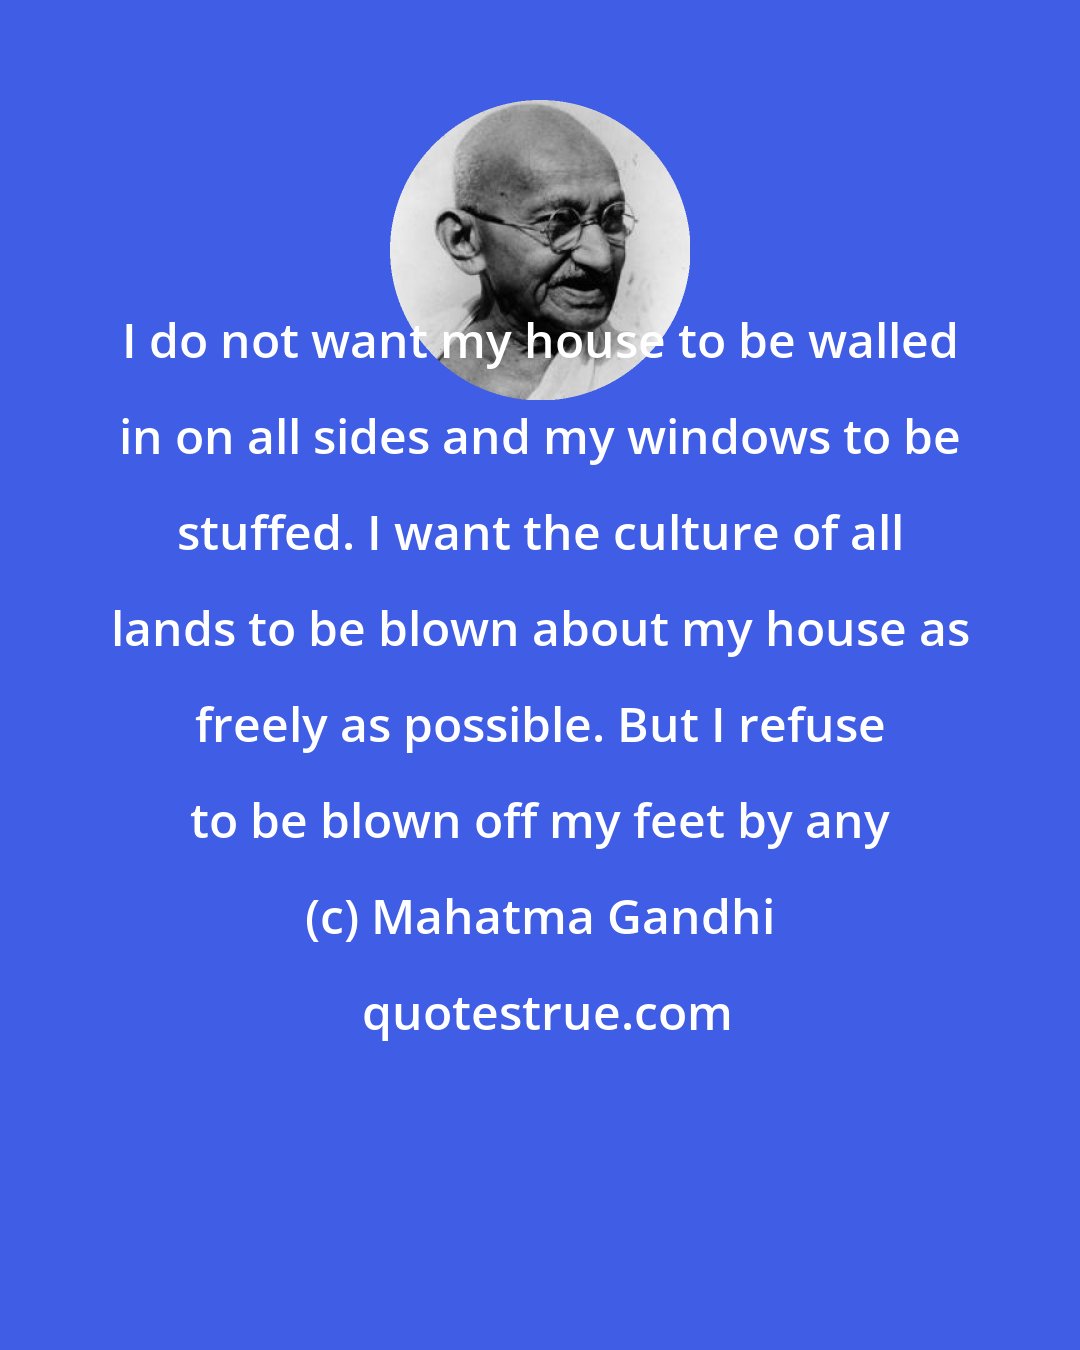 Mahatma Gandhi: I do not want my house to be walled in on all sides and my windows to be stuffed. I want the culture of all lands to be blown about my house as freely as possible. But I refuse to be blown off my feet by any